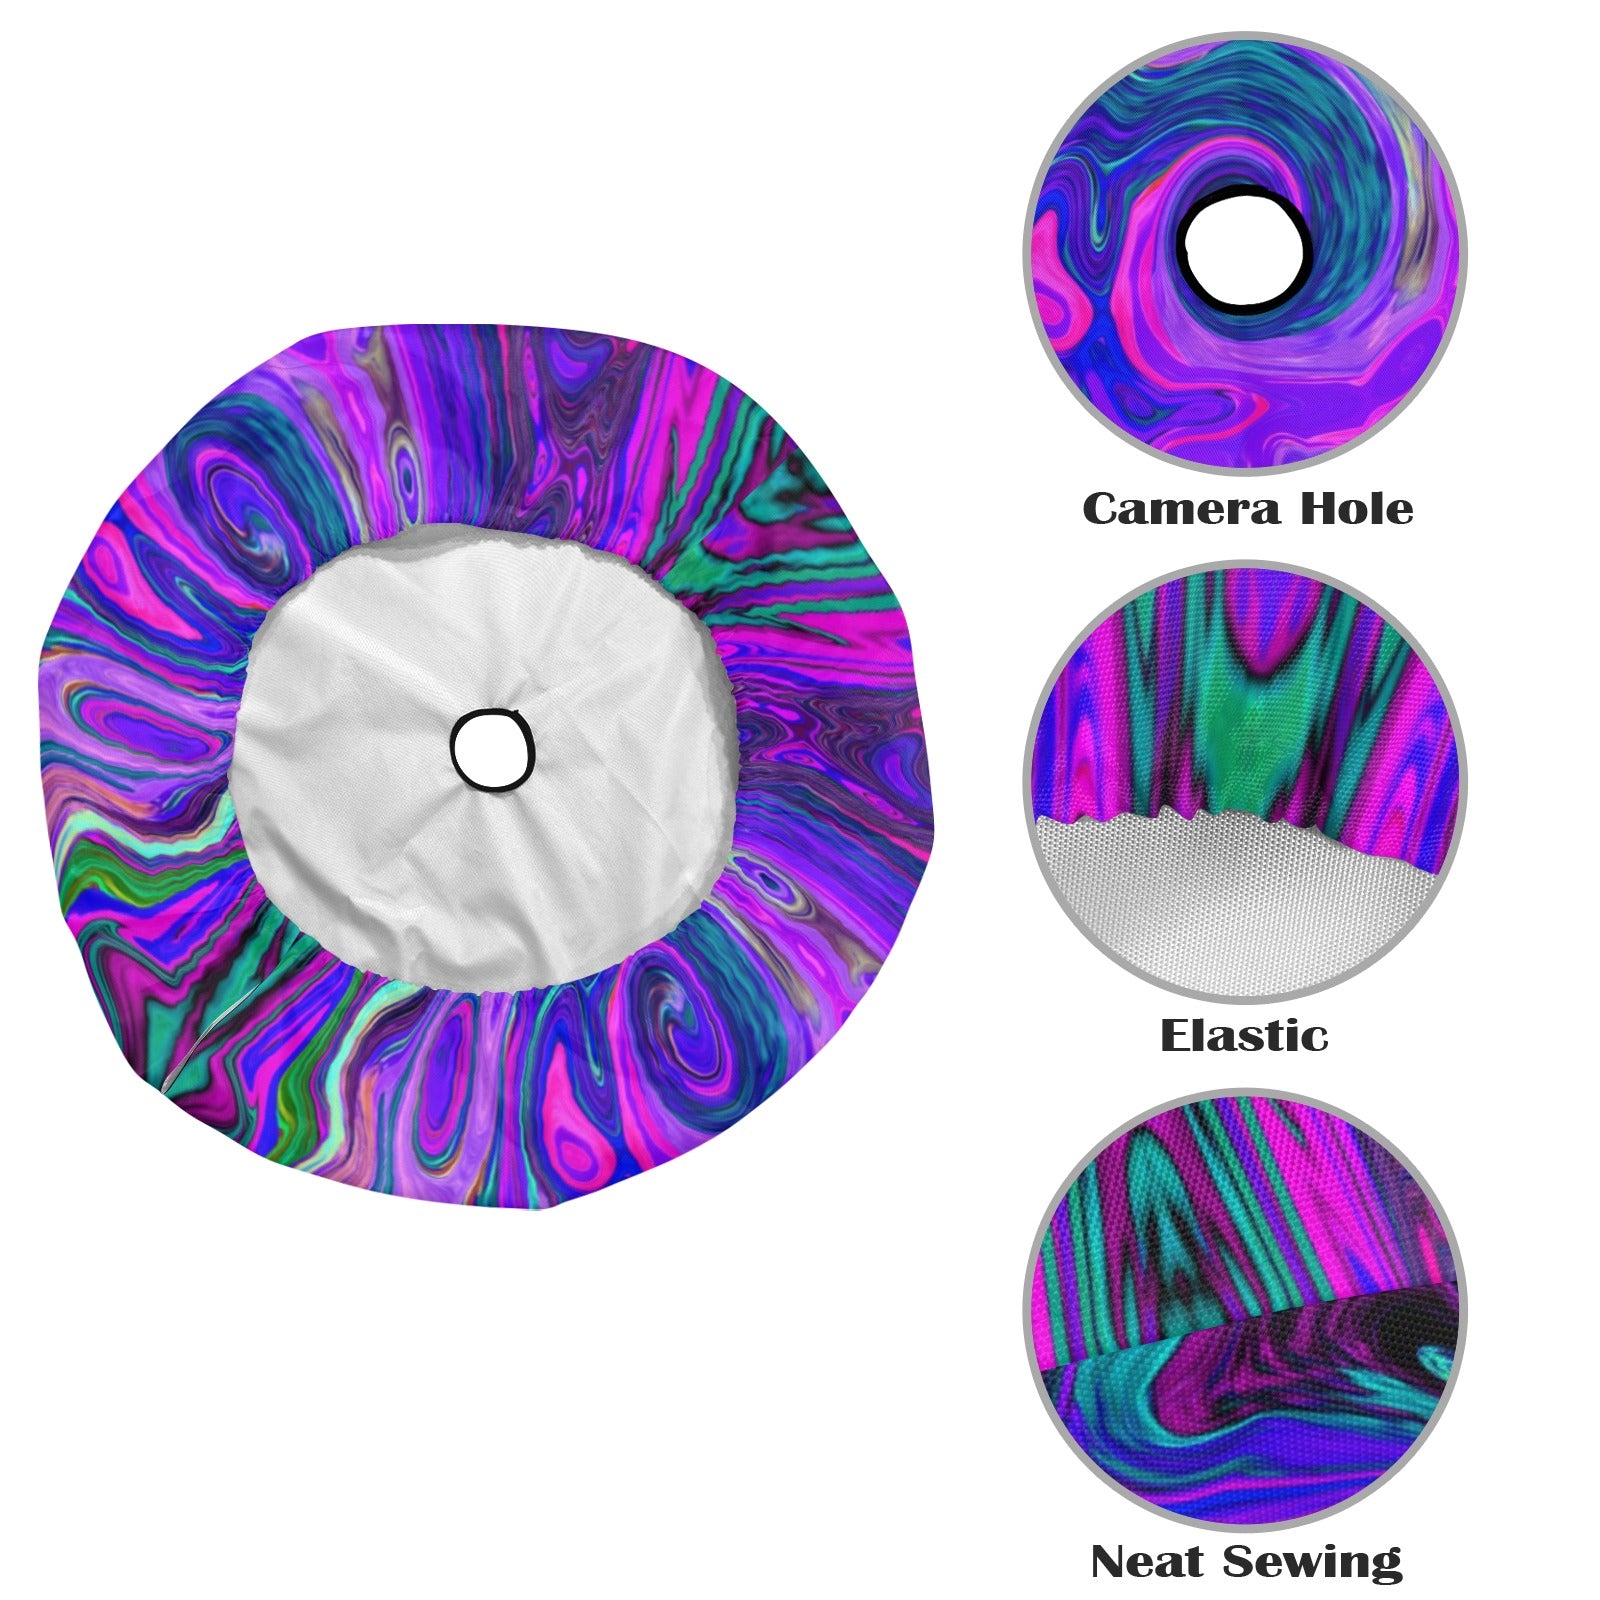 Spare Tire Cover with Backup Camera Hole - Groovy Abstract Retro Magenta and Purple Swirl - Large